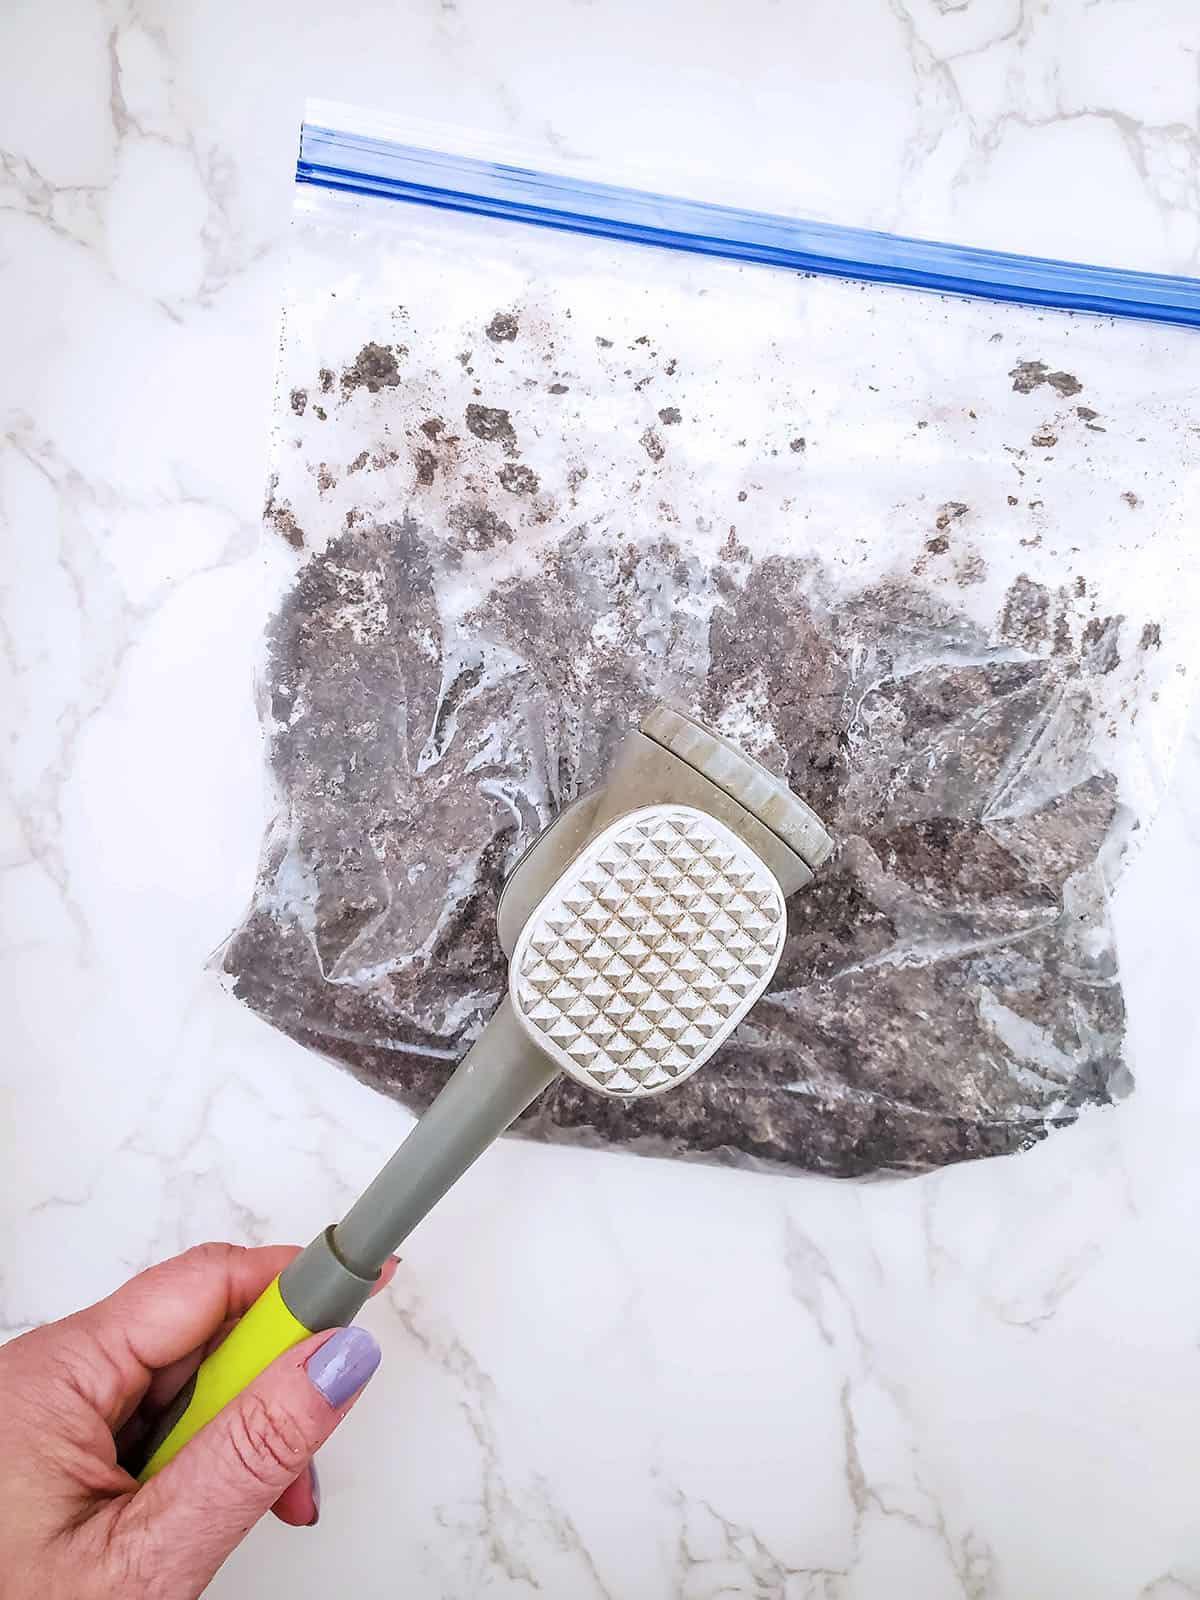 The oreo crumbles being crushed with a kitchen mallet.